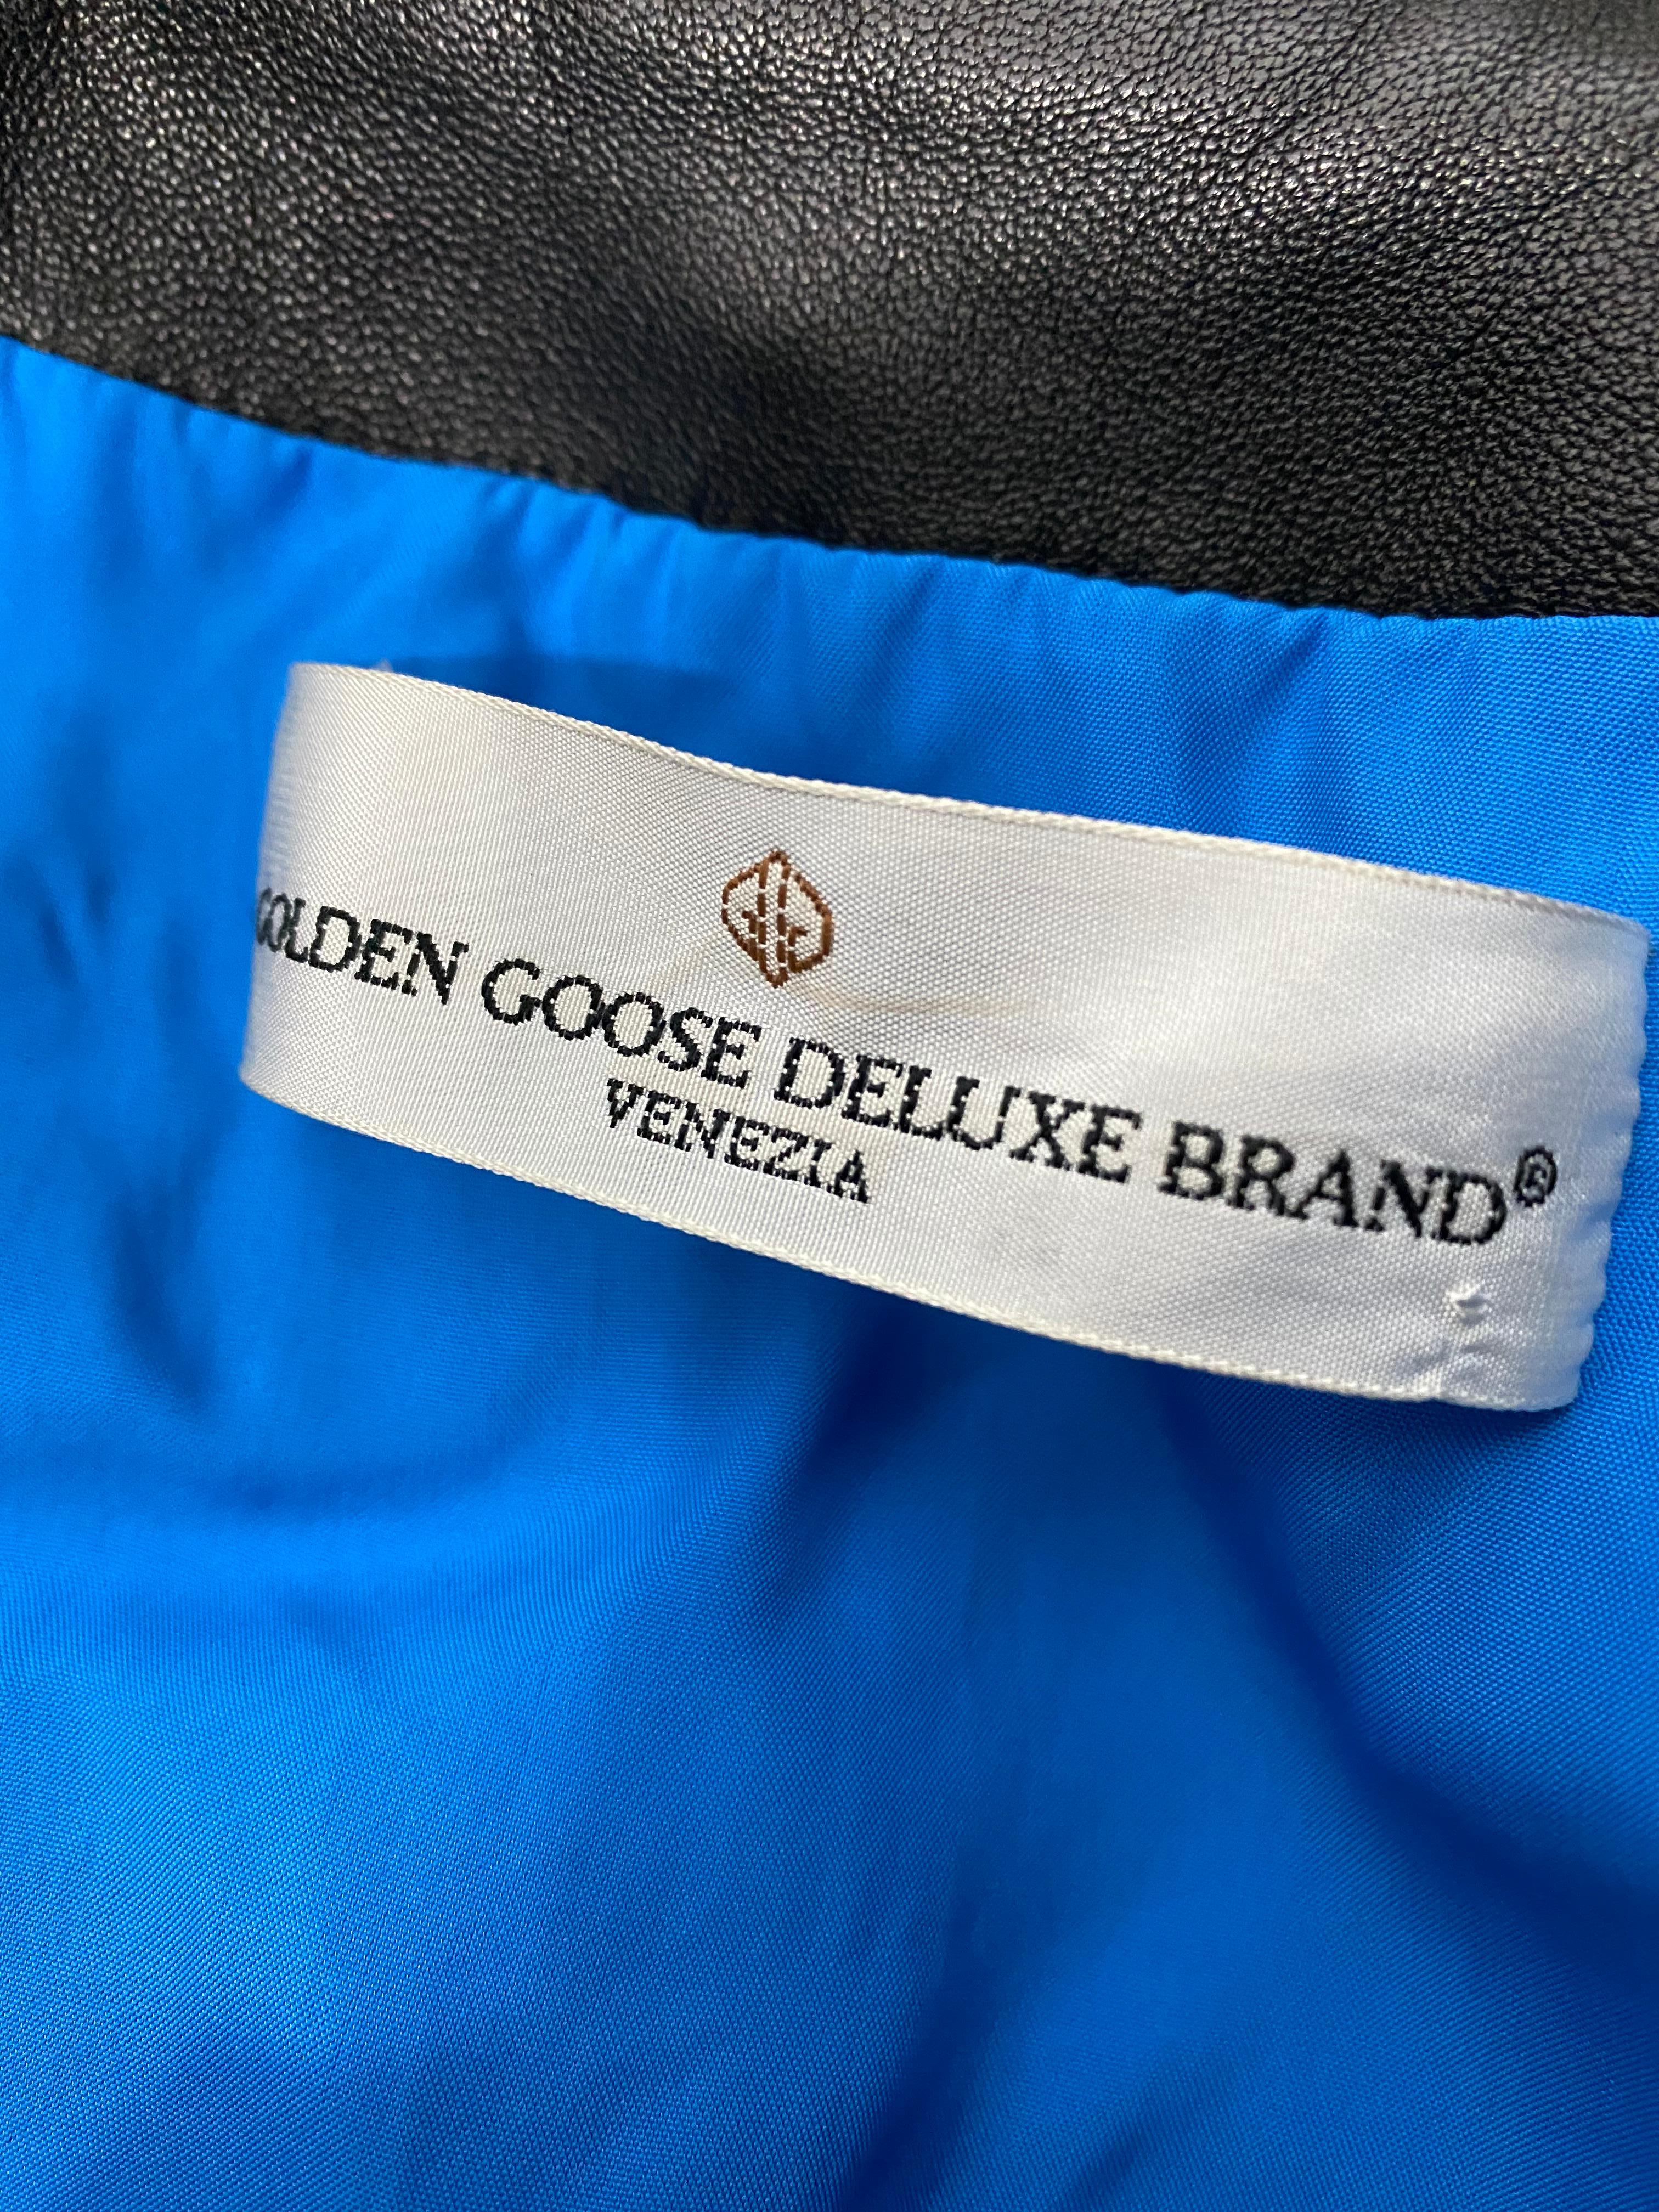 Golden Goose Deluxe Brand Black Calf Leather Jacket Size M For Sale 3